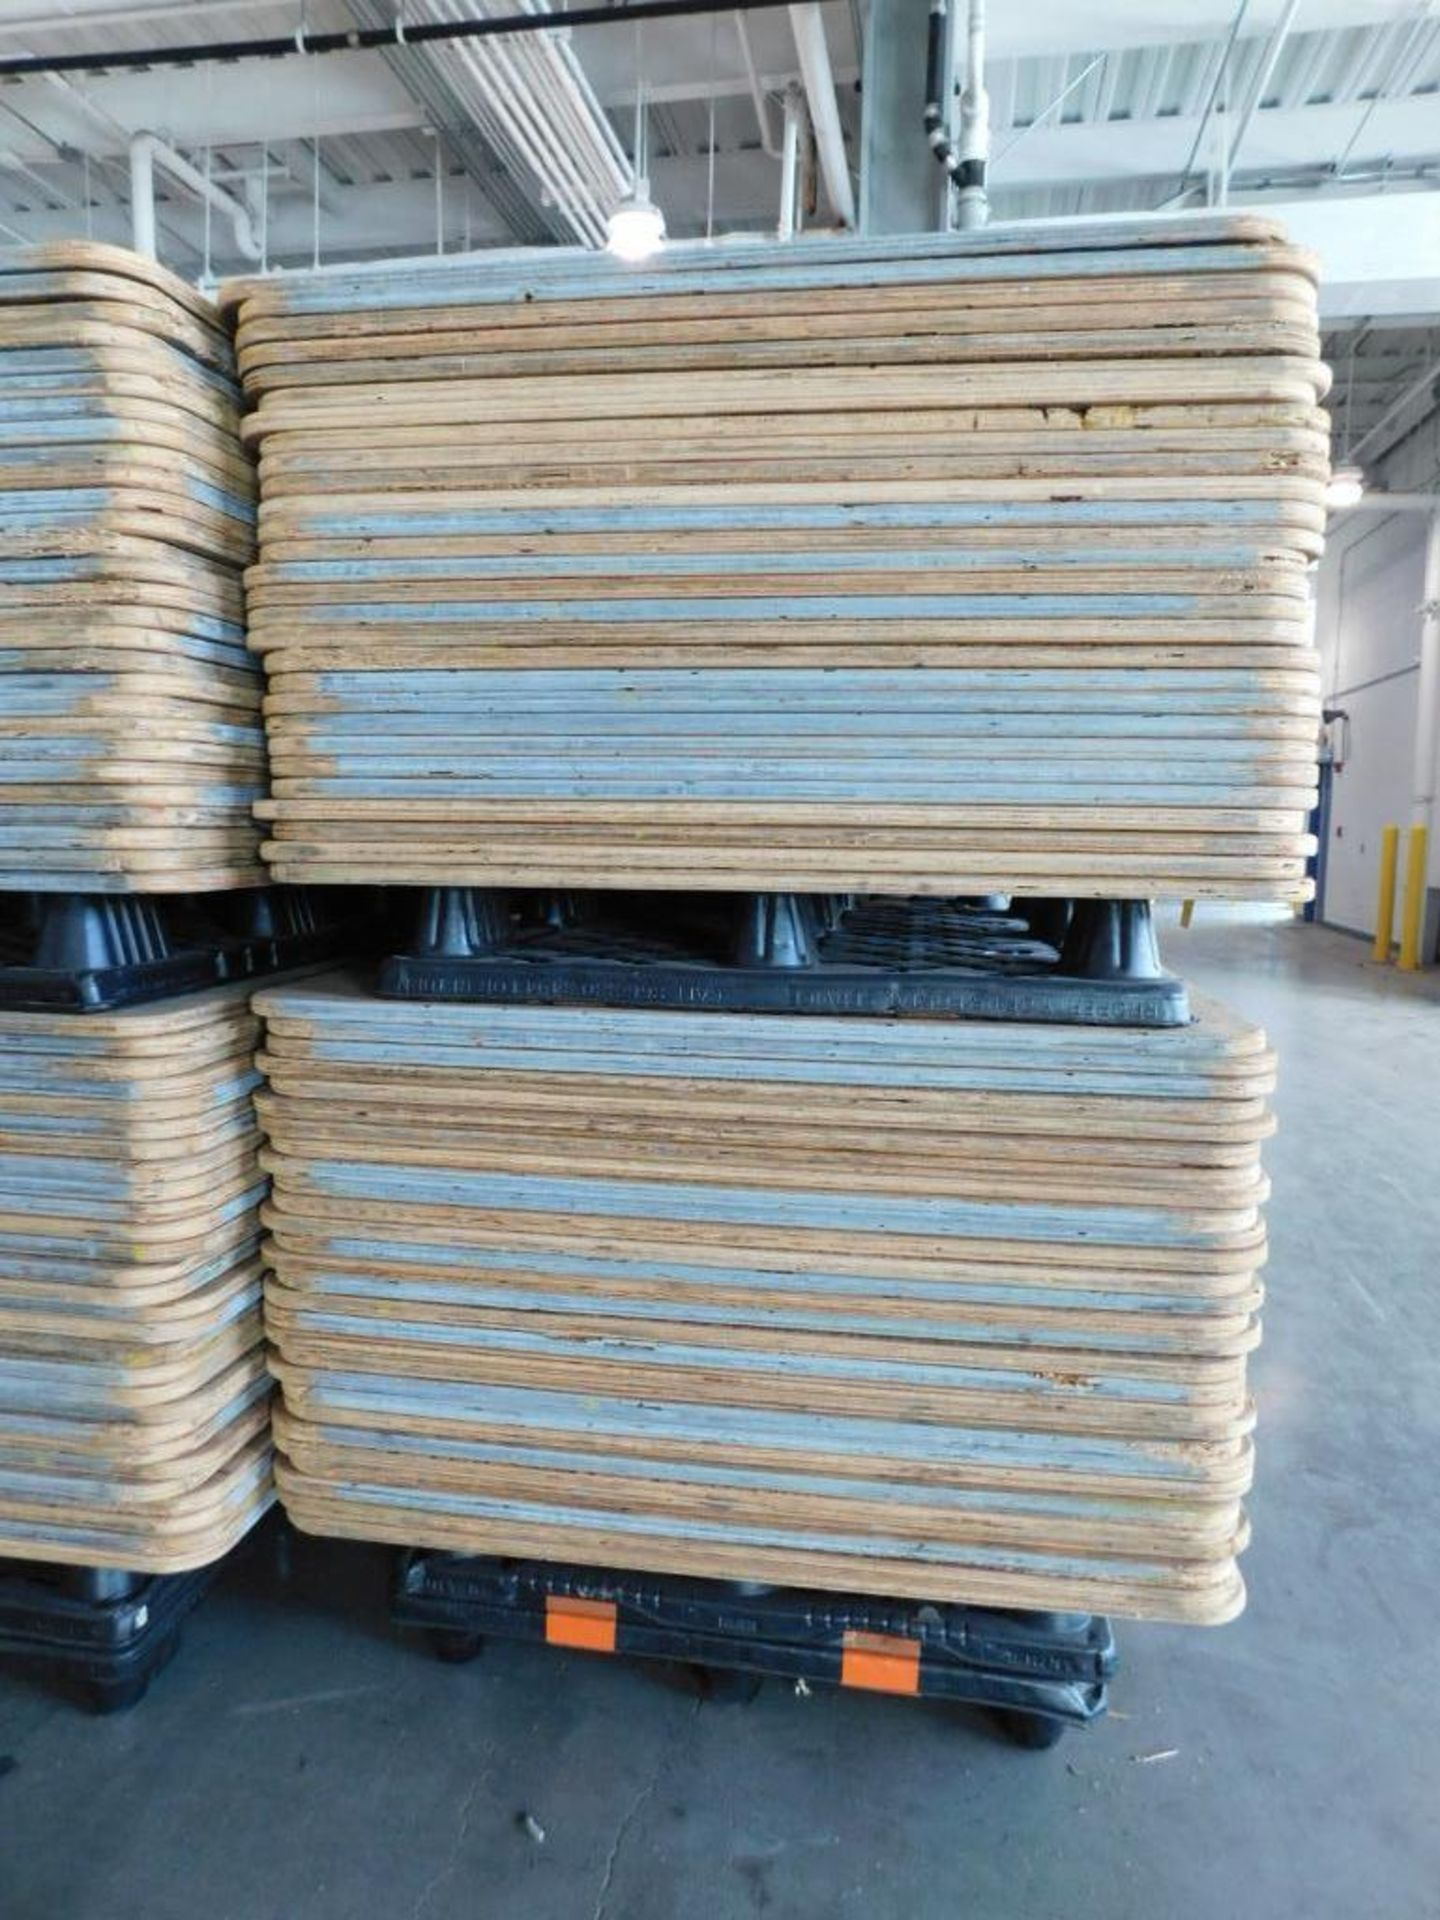 LOT: Large Quantity of 50" x 50" Wood Paper Roll Pallets on (12) Plastic Pallets (LOCATION: IN MAIL - Image 3 of 8